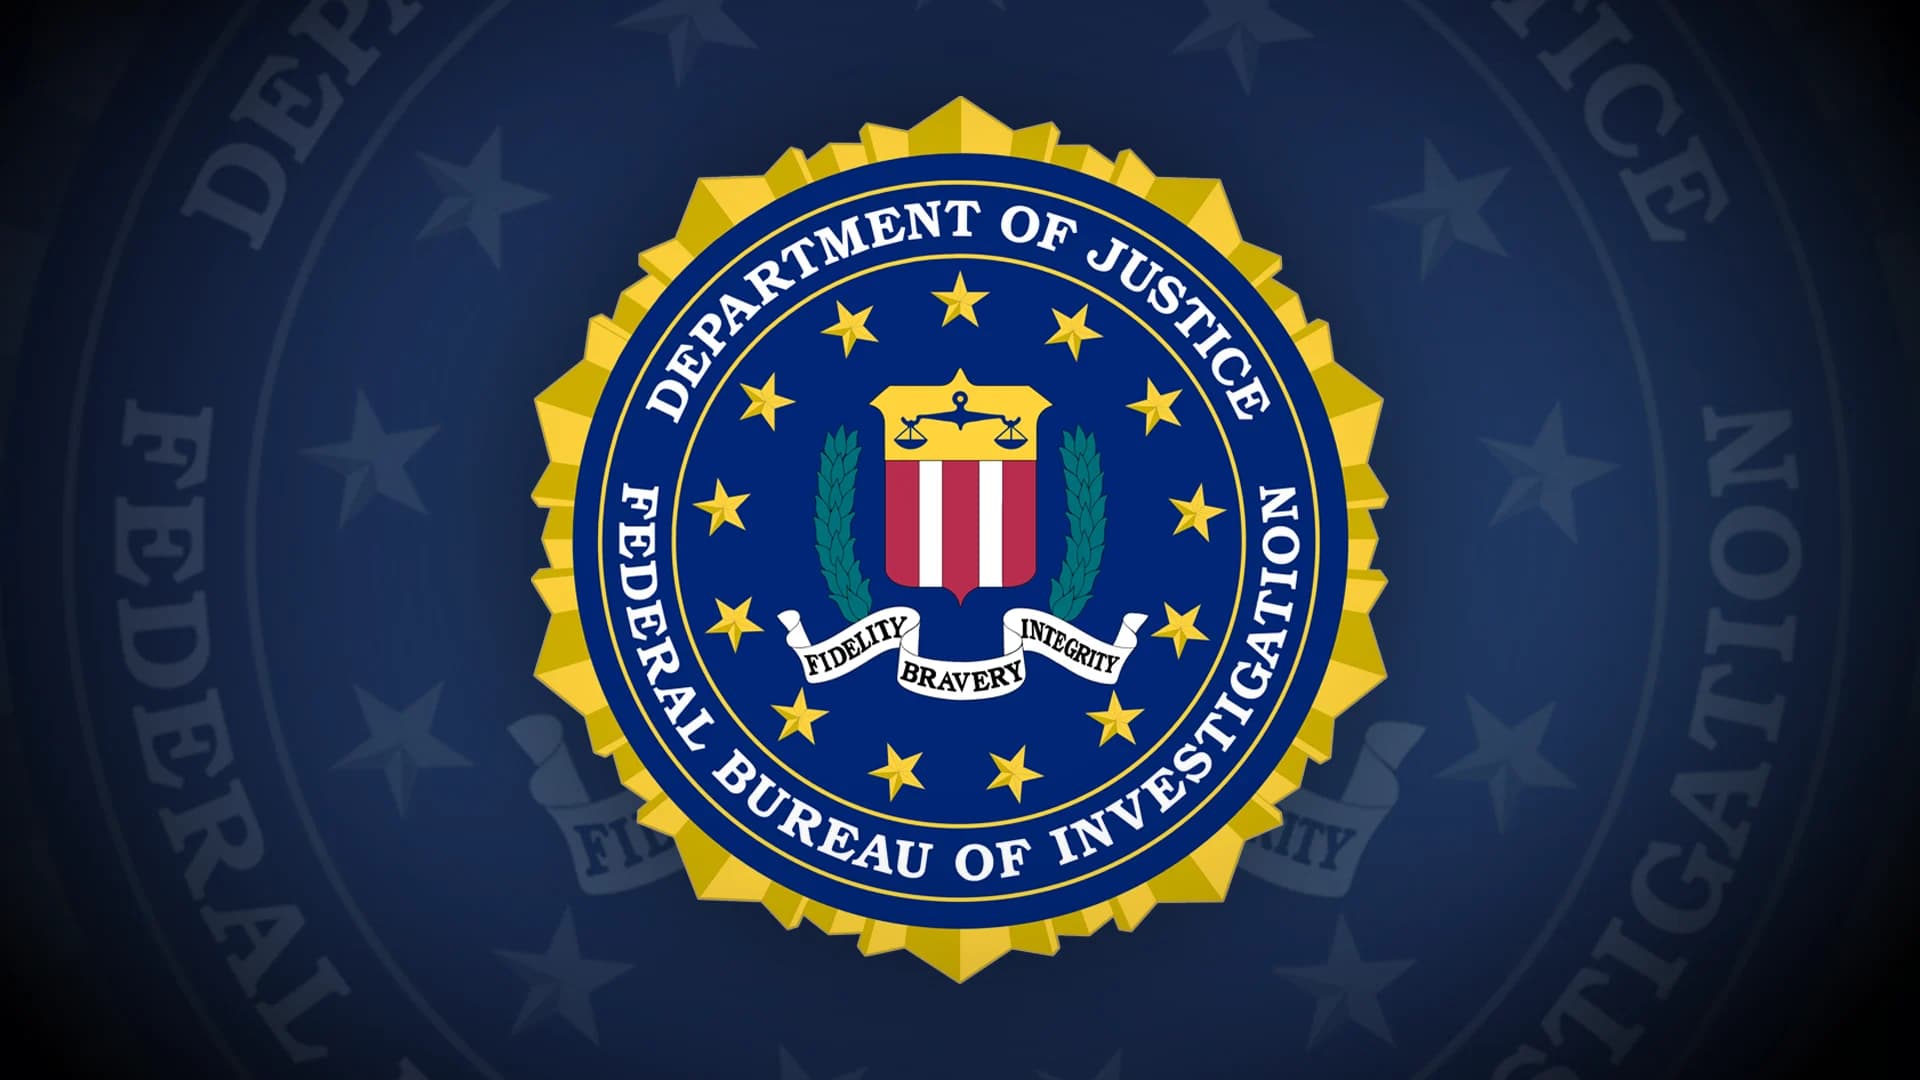 Armed man killed after trying to breach FBI office, standoff